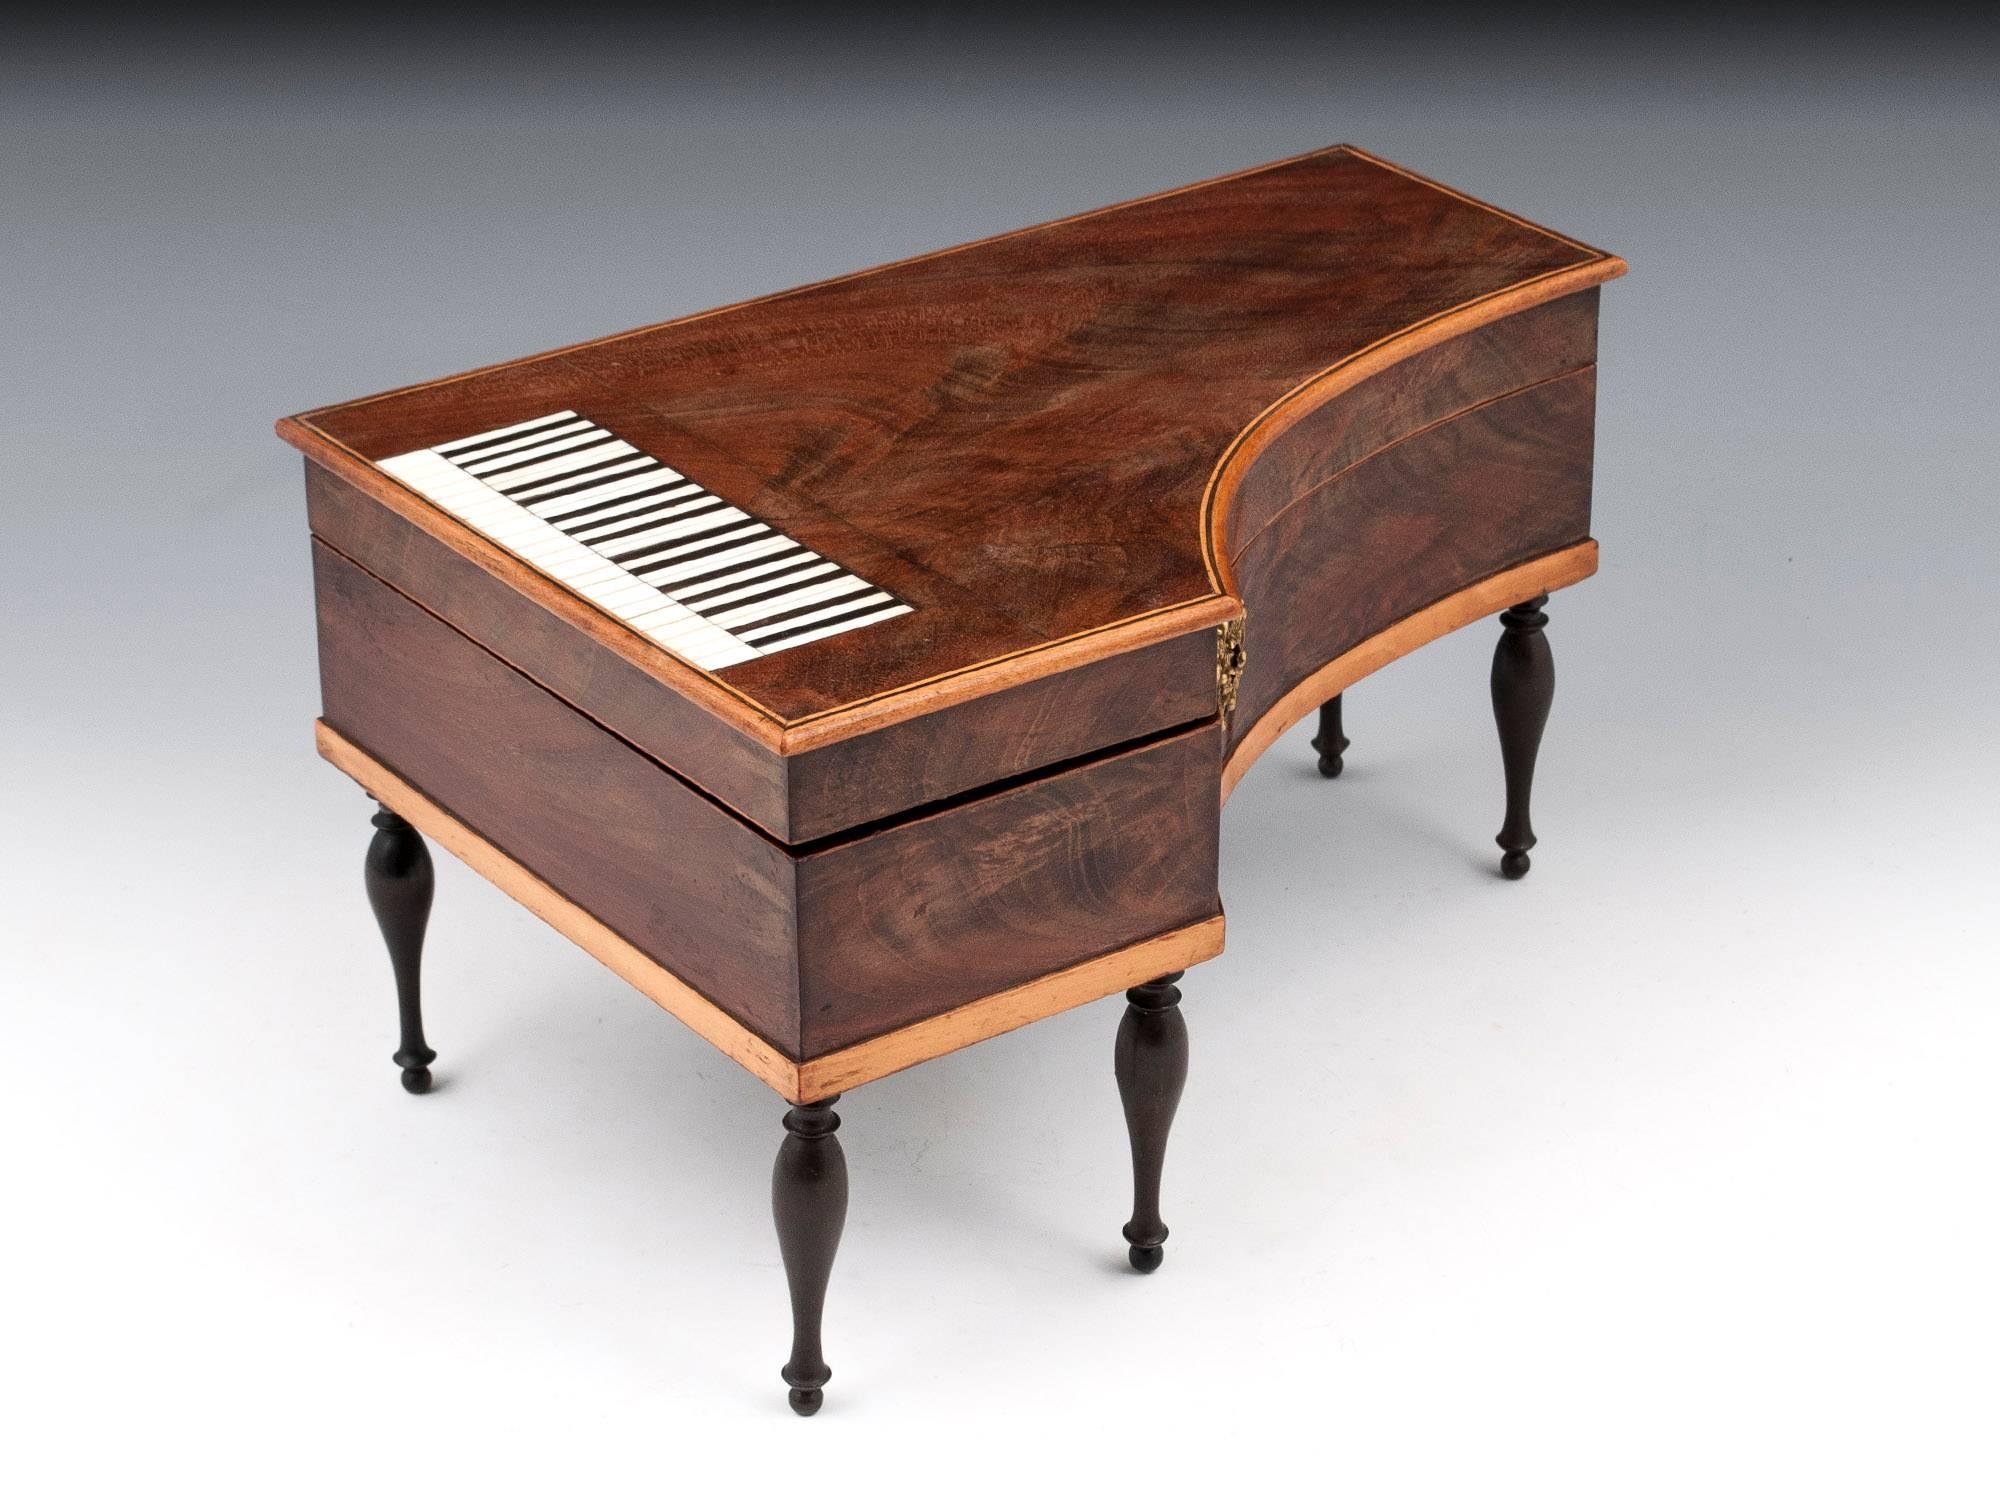 Antique Palais Royal mahogany sewing in the form of a miniature grand piano. The charming piano keys on the top of the box are made of ebony and bone, with the minor keys being slightly raised for an authentic look and feel. Standing on five turned